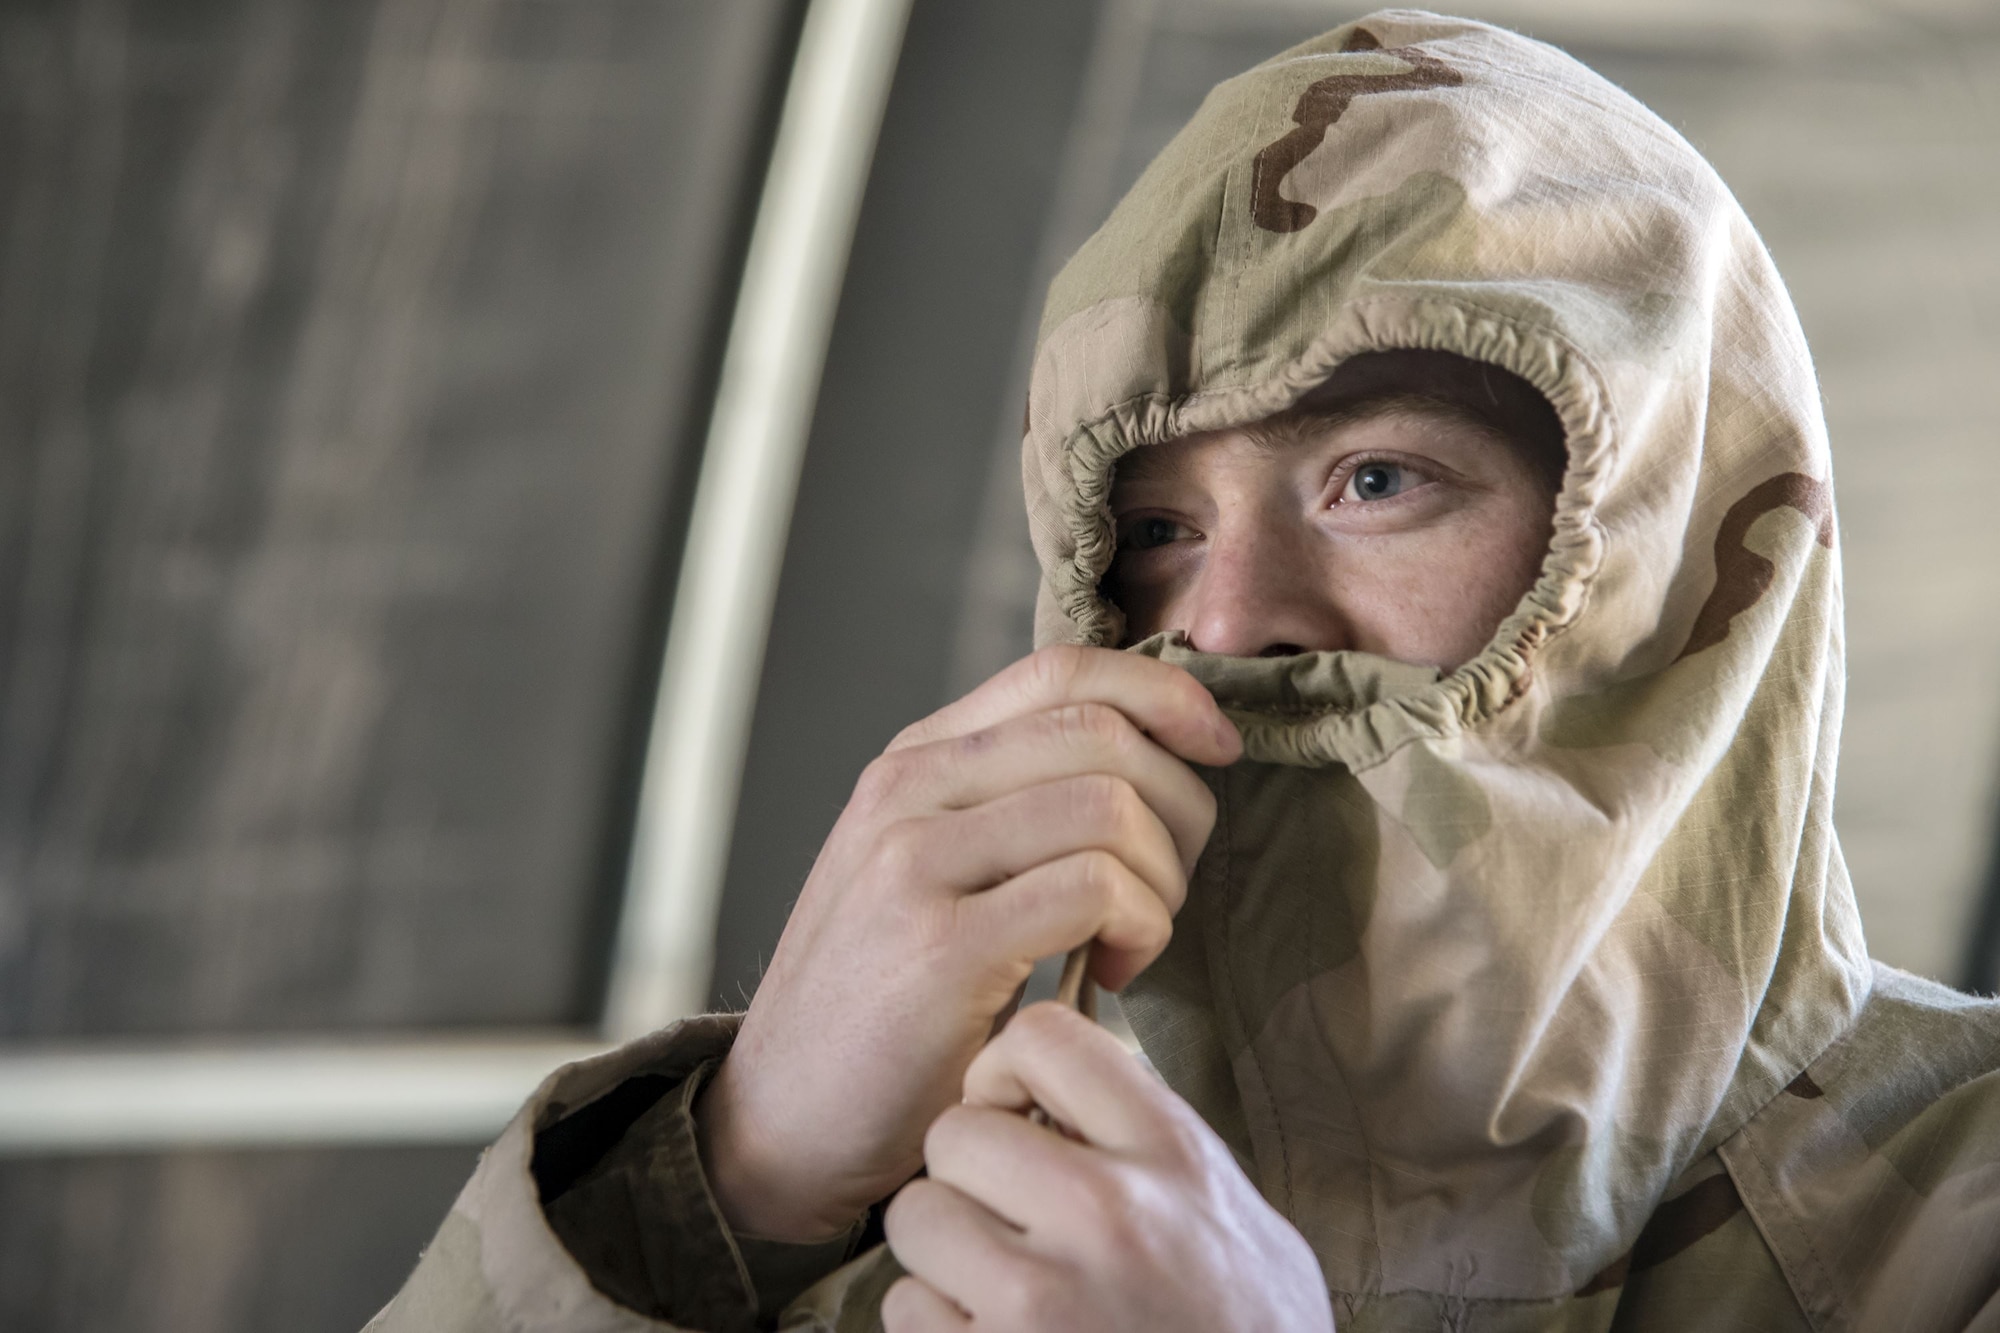 Senior Airman Collin Chase, 23d Maintenance Squadron aircraft fuels systems journeyman, tightens the barrel locks on the hood of his overcoat, Feb. 1, 2018, at Moody Air Force Base, Ga. Airmen participated in a chemical, biological, radiological and nuclear defense (CBRNE) class to better prepare them to combat enemy attacks while also familiarizing them with mission-oriented protective posture (MOPP) gear. (Air Force photo by Airman Eugene Oliver)